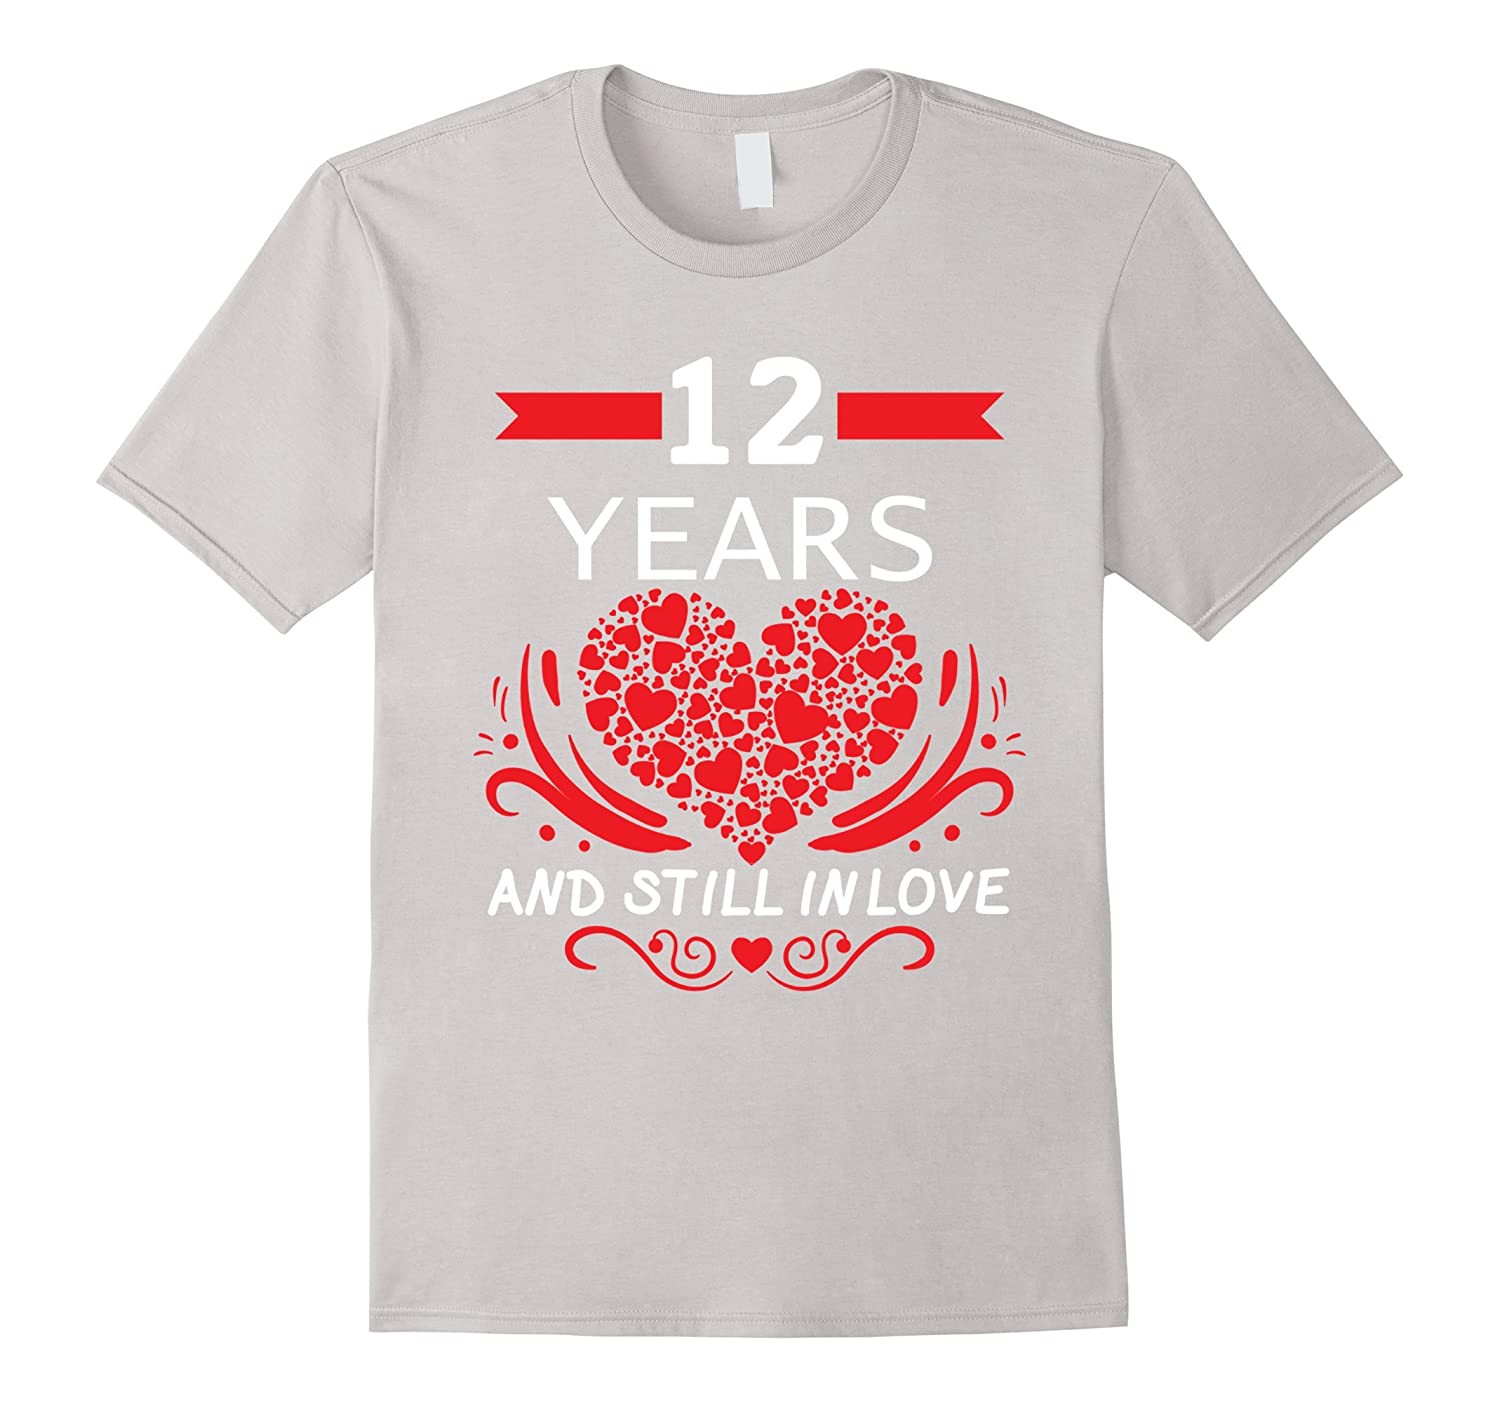 12 Year Anniversary Gift Ideas For Her
 12th Wedding Anniversary Gifts 12 Year Shirt For Him and